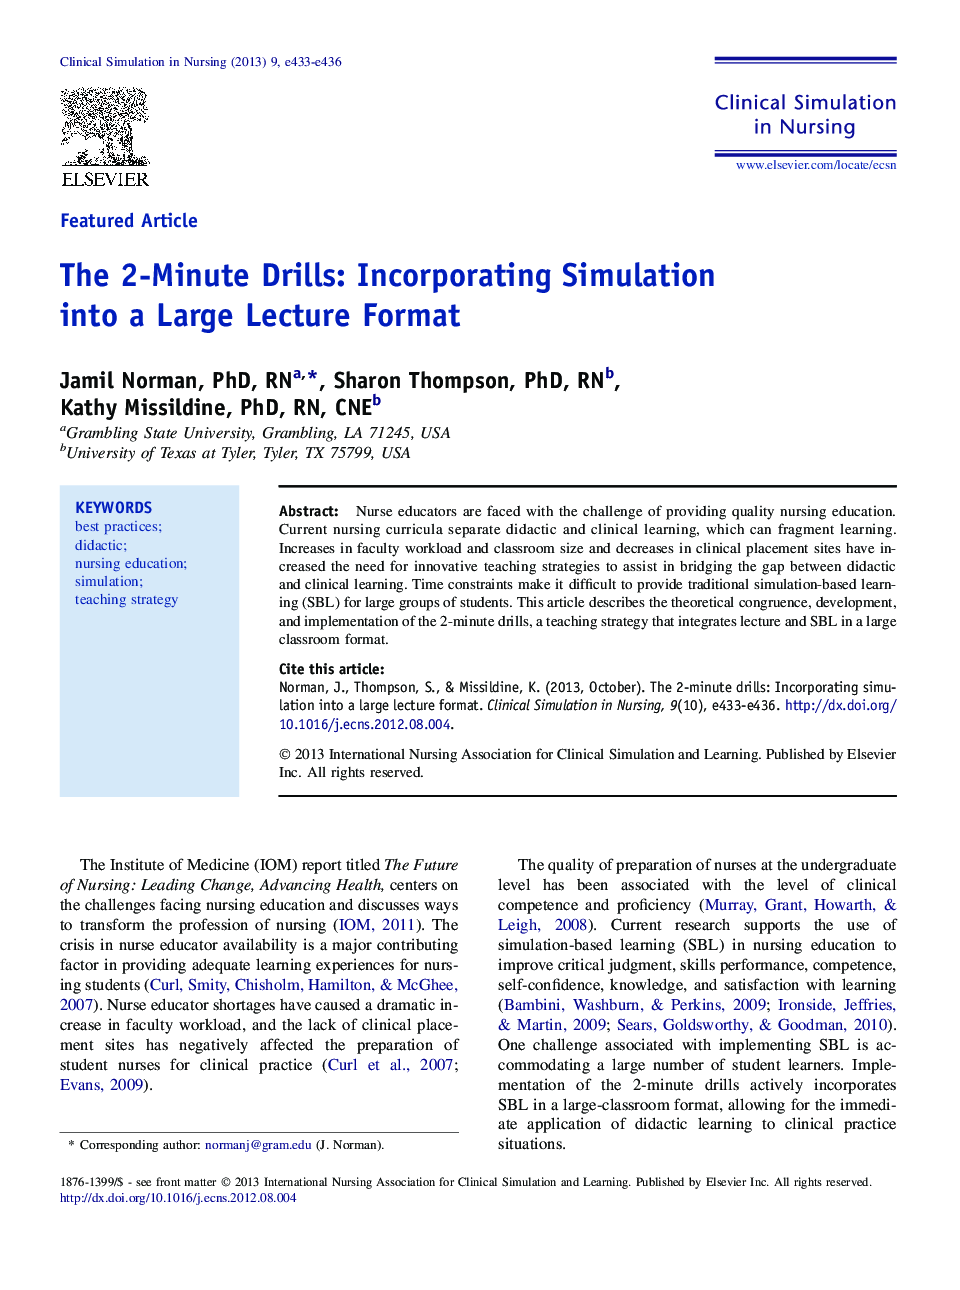 The 2-Minute Drills: Incorporating Simulation into a Large Lecture Format